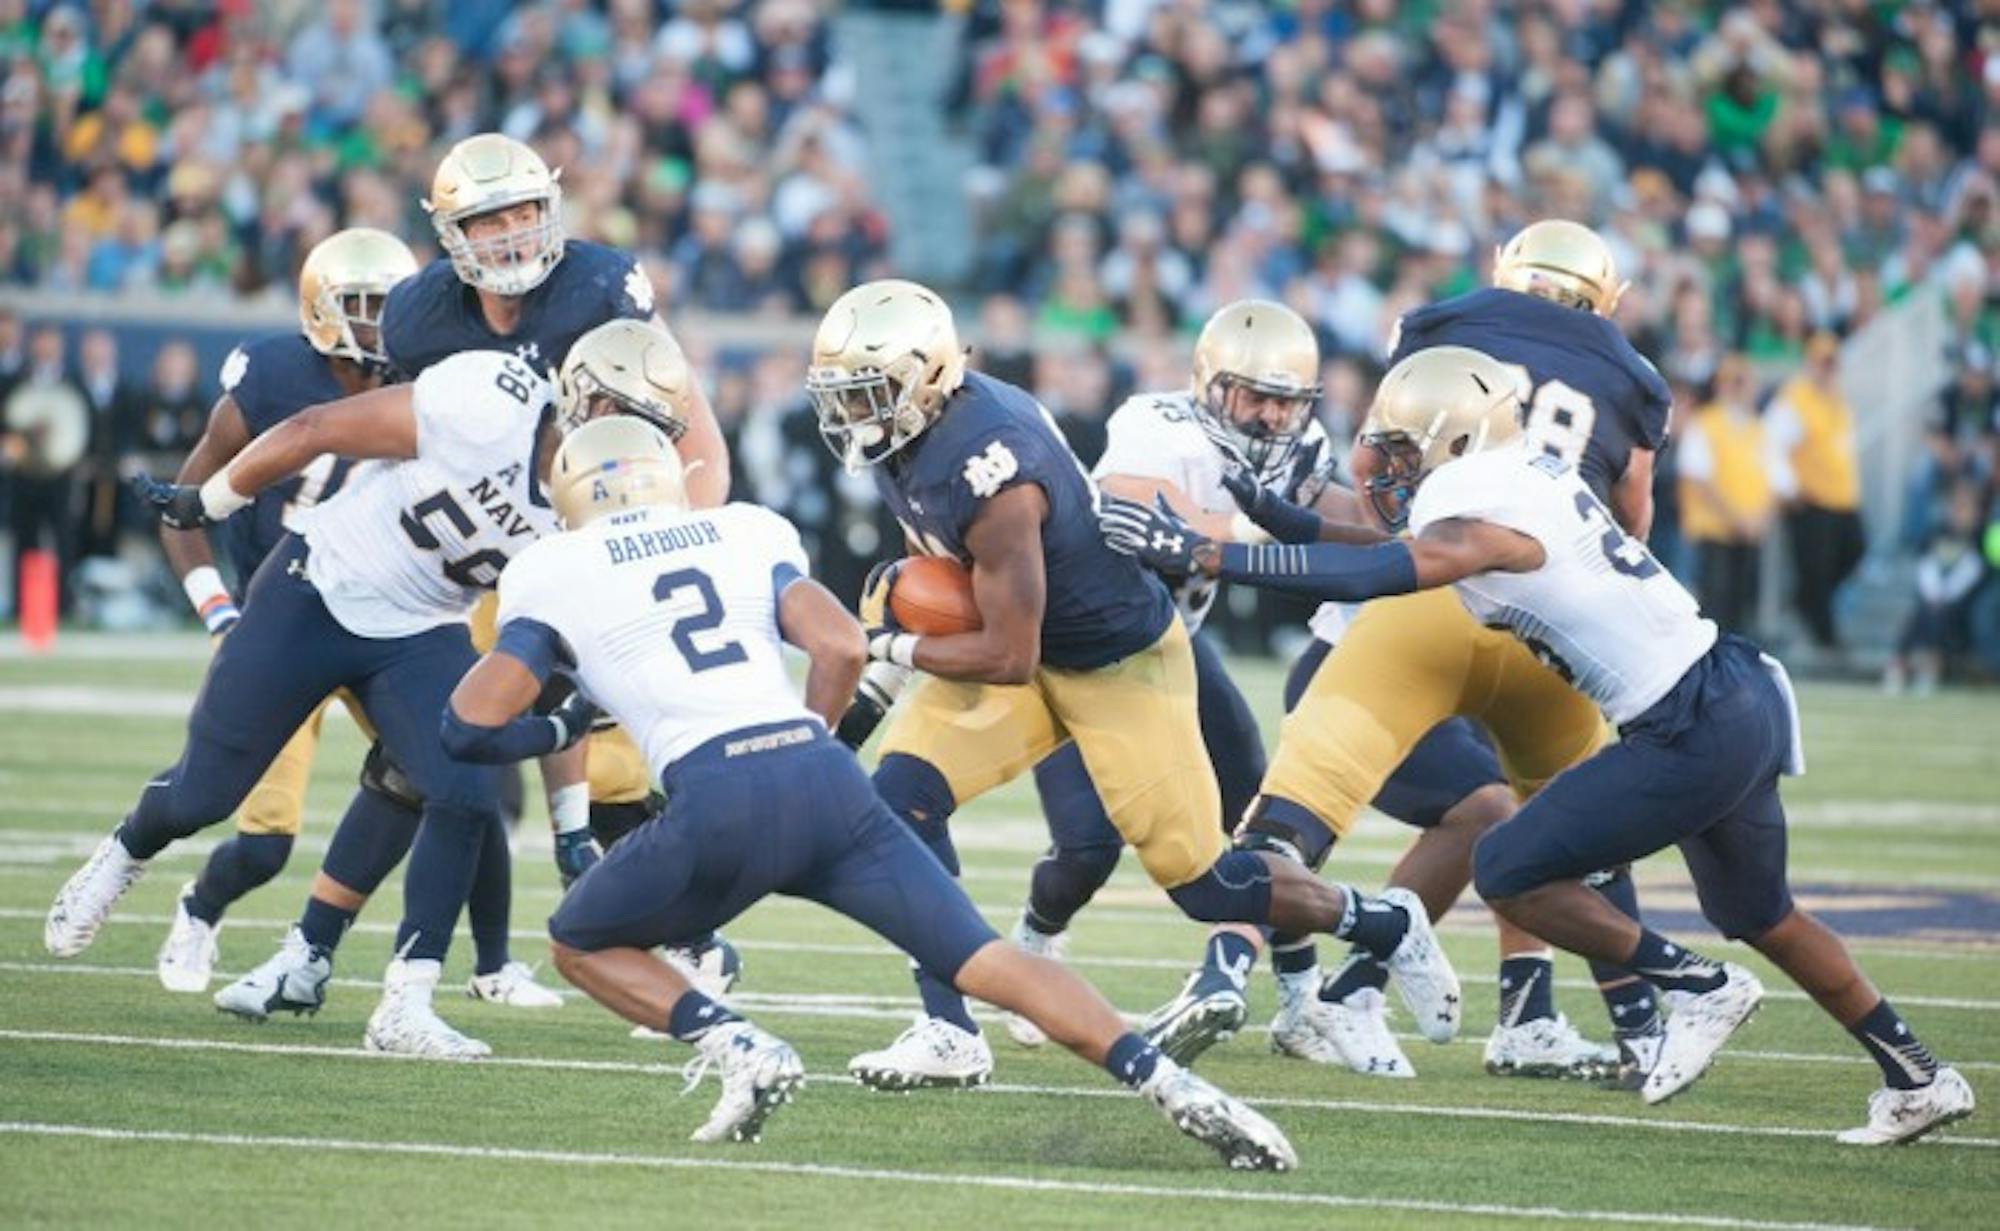 Irish senior running back C.J. Prosise finds a hole Saturday during Notre Dame’s 41-24 victory over Navy. Prosise carried the ball 21 times for 129 yards and three touchdowns, bringing his season totals to 823 yards and nine touchdowns on the ground. Prosise also added four catches for 56 yards to his stat line.